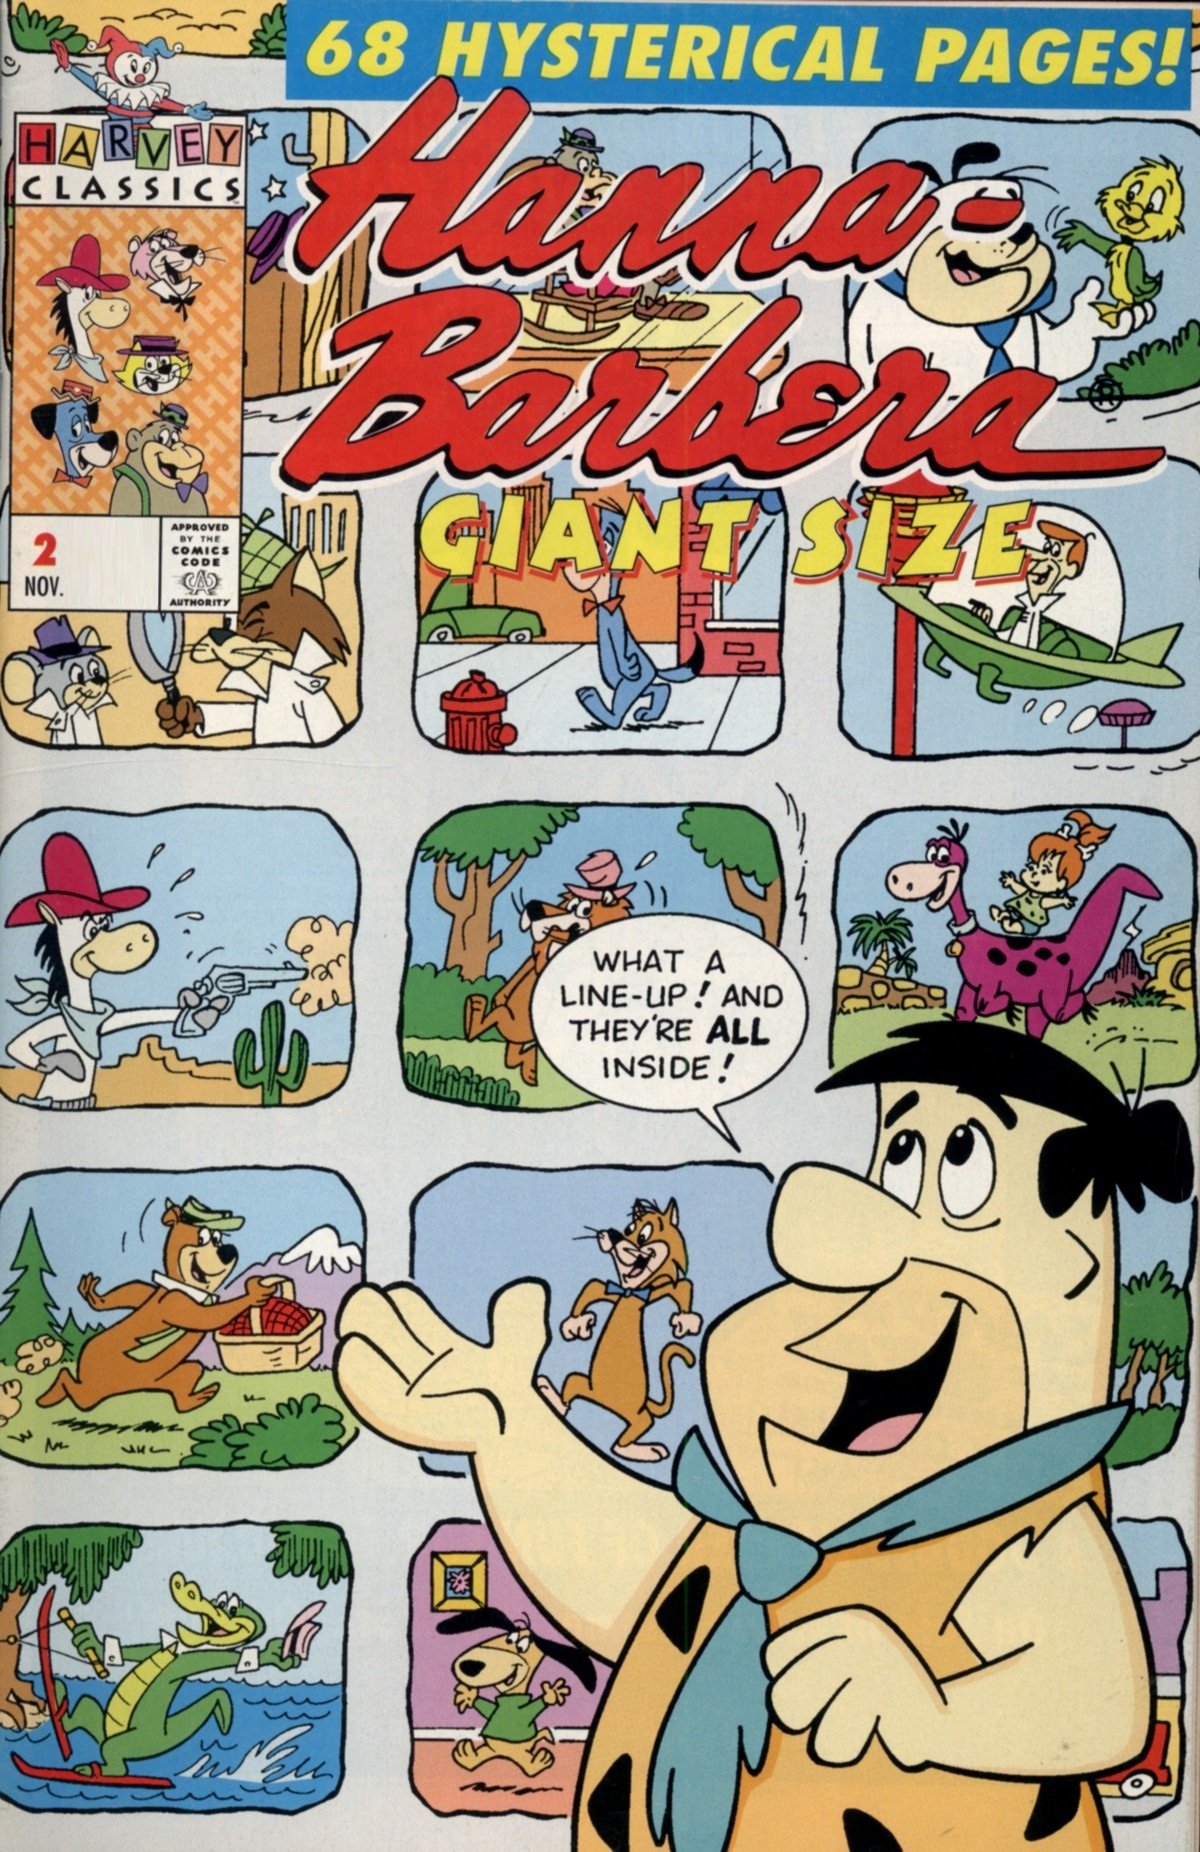 Read online Hanna Barbera Giant Size comic -  Issue #2 - 33